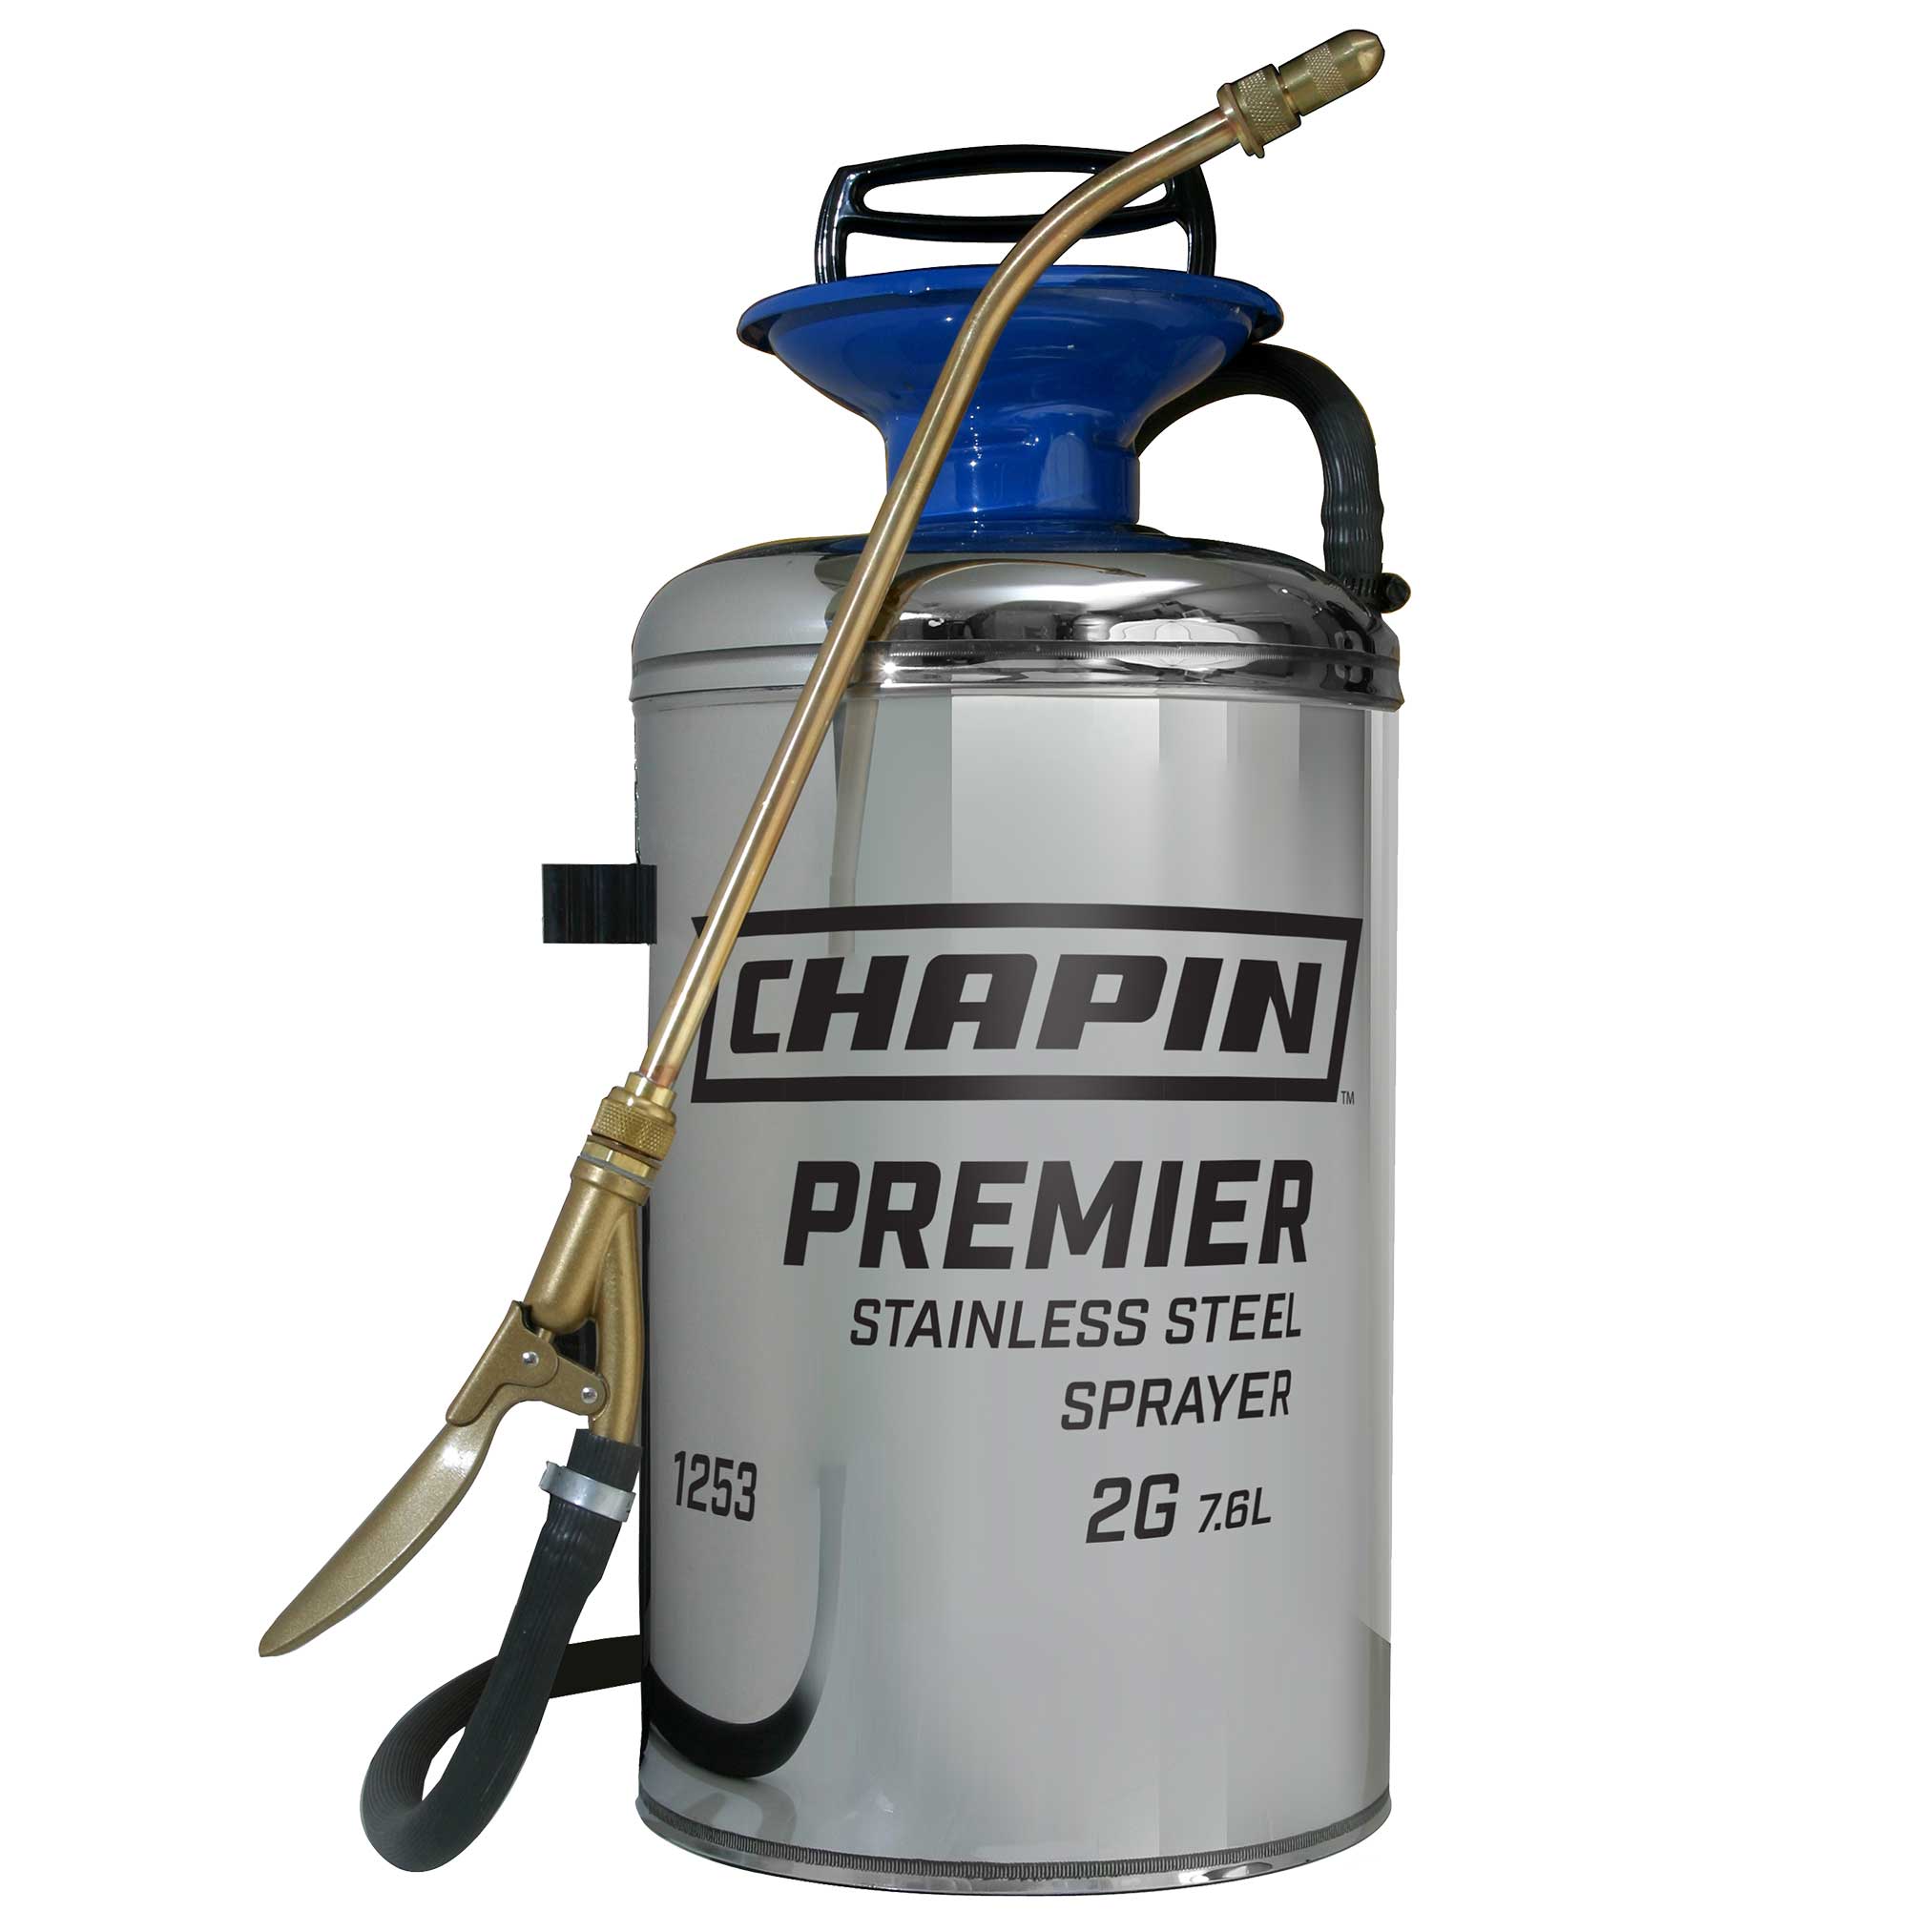 CHAPIN, Chapin's 1253 Premier Series Stainless Steel Sprayer